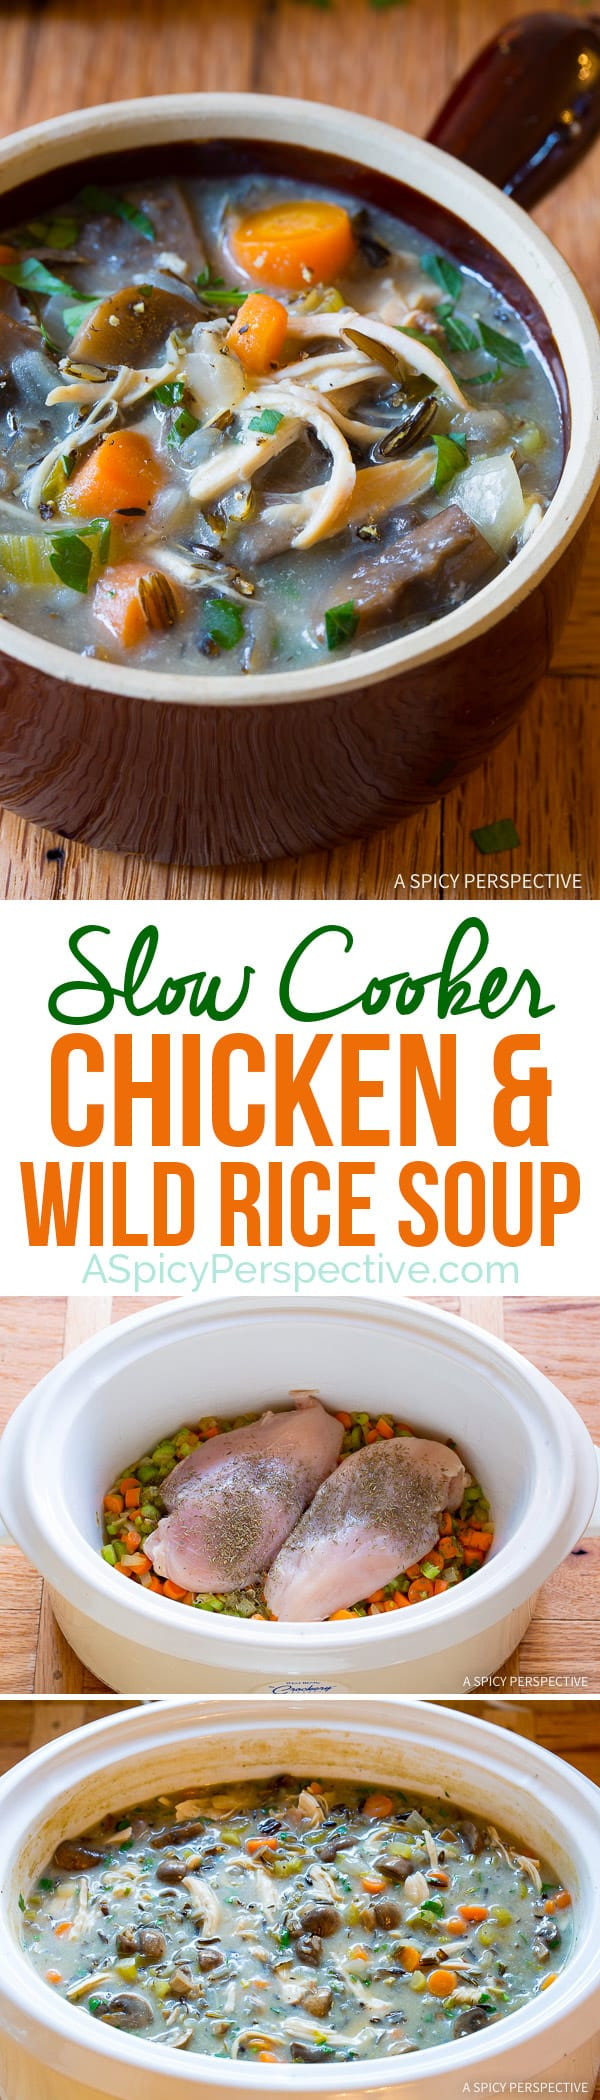 Chicken Wild Rice Soup Slow Cooker
 Slow Cooker Chicken Wild Rice Soup Healthy A Spicy